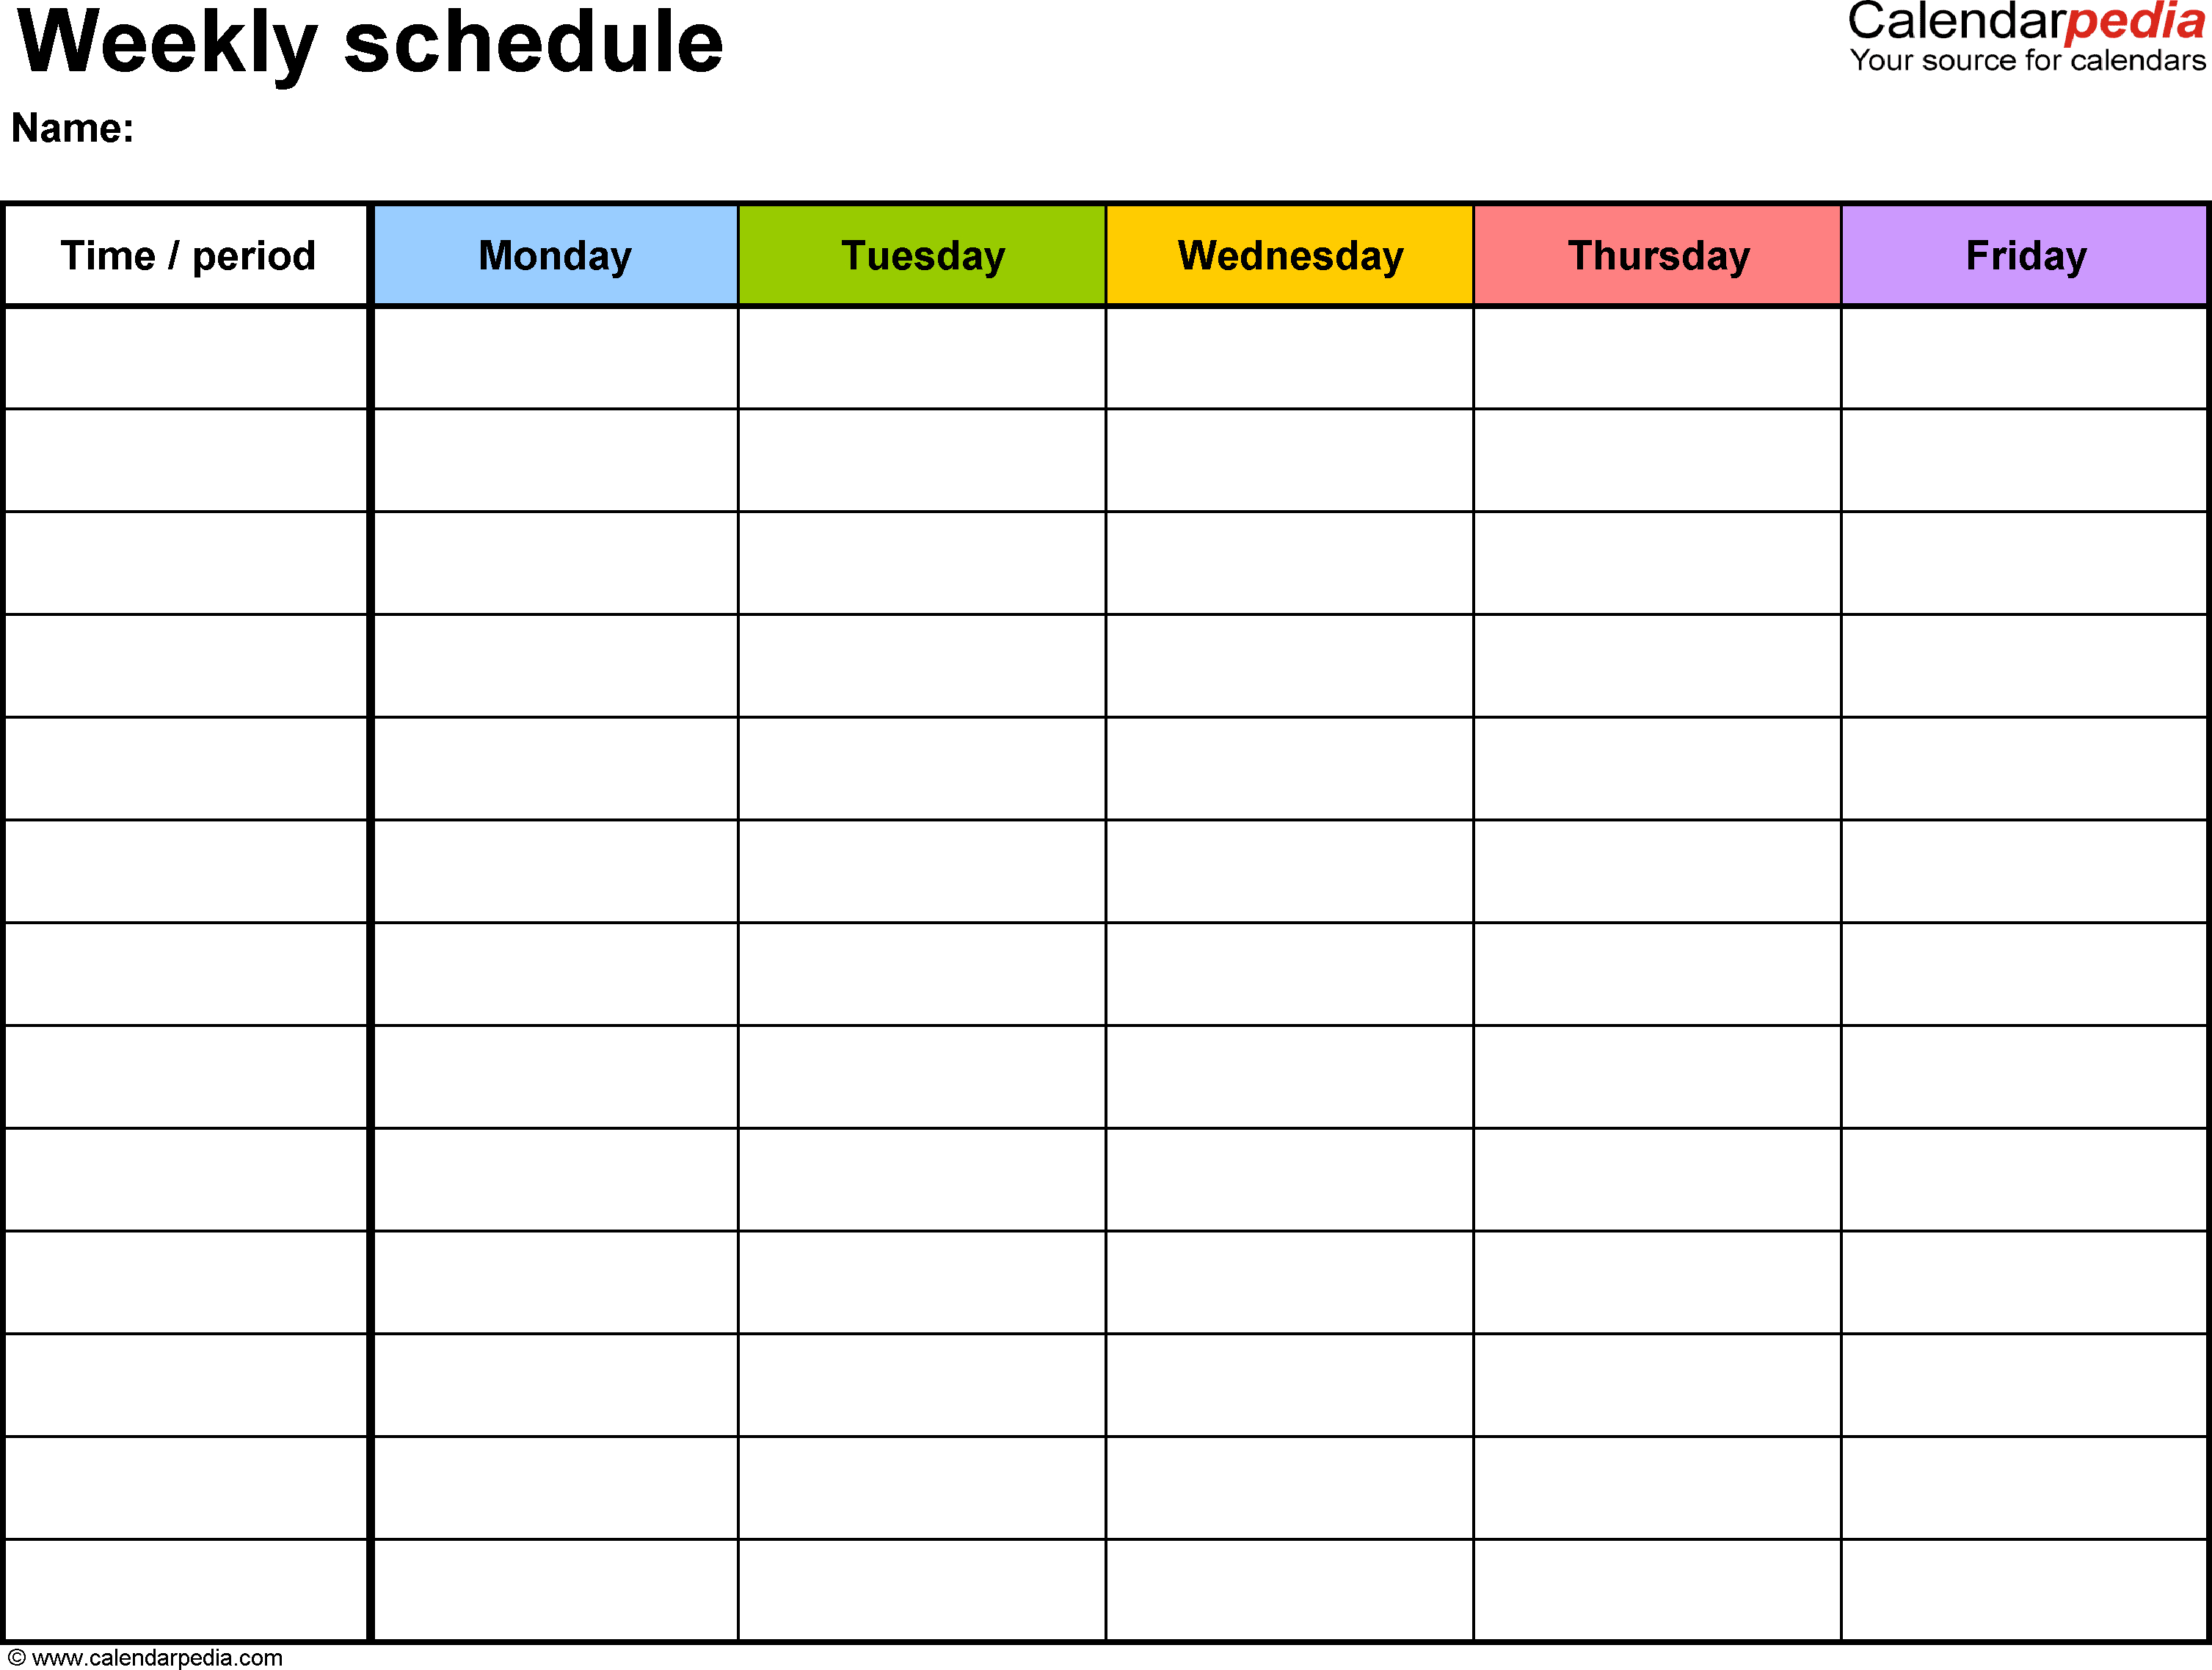 Excel Spreadsheet Calendar Template With Regard To Free Weekly Schedule Templates For Excel  18 Templates